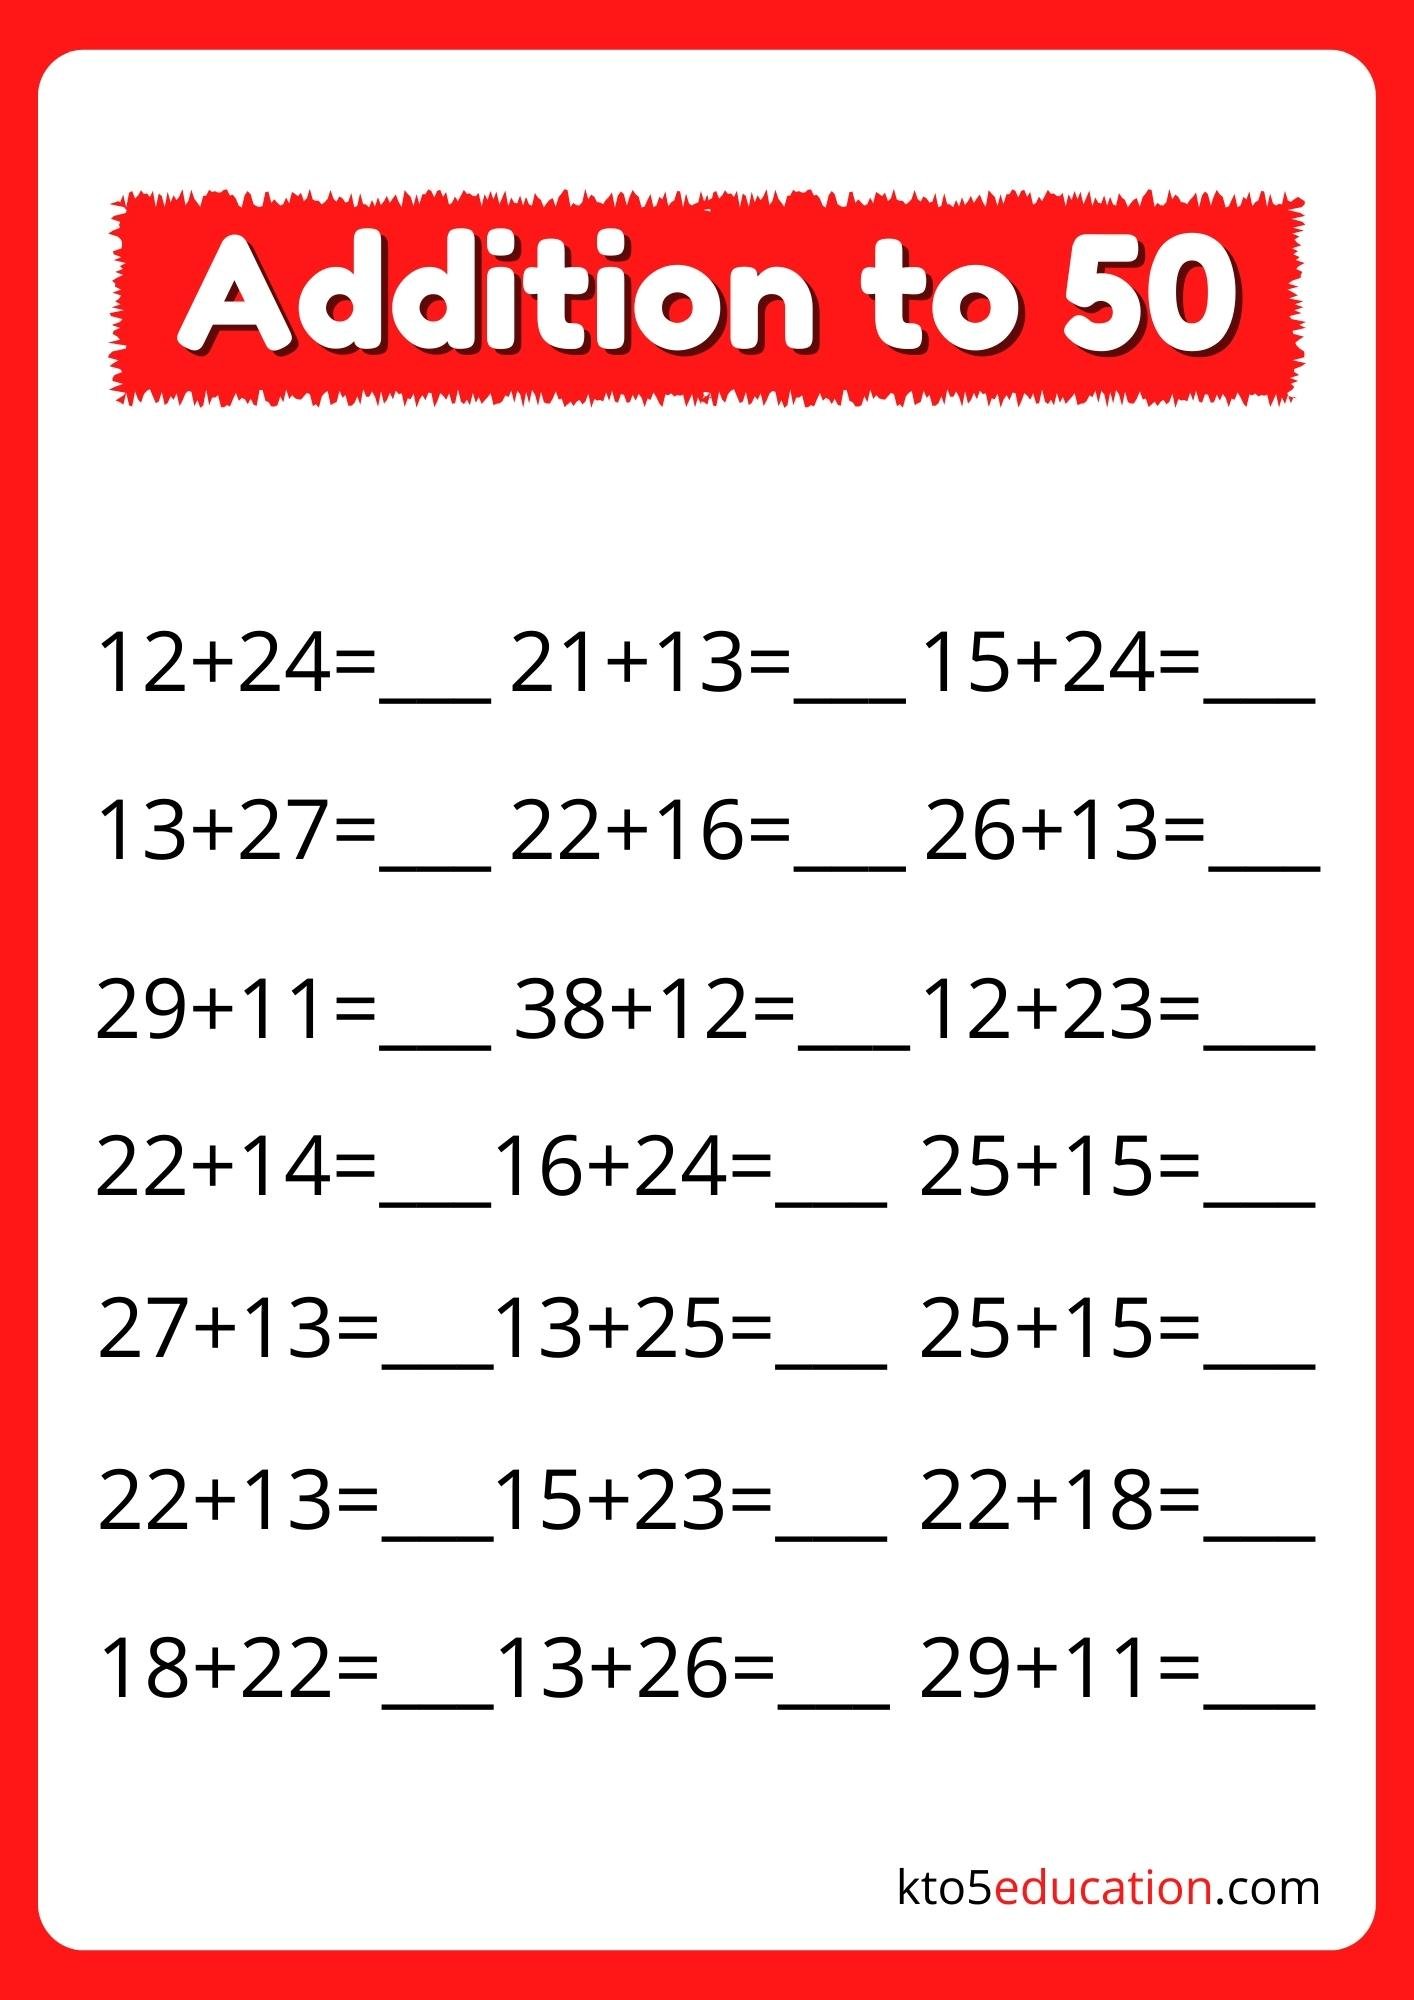 Addition Up To 50 Worksheets